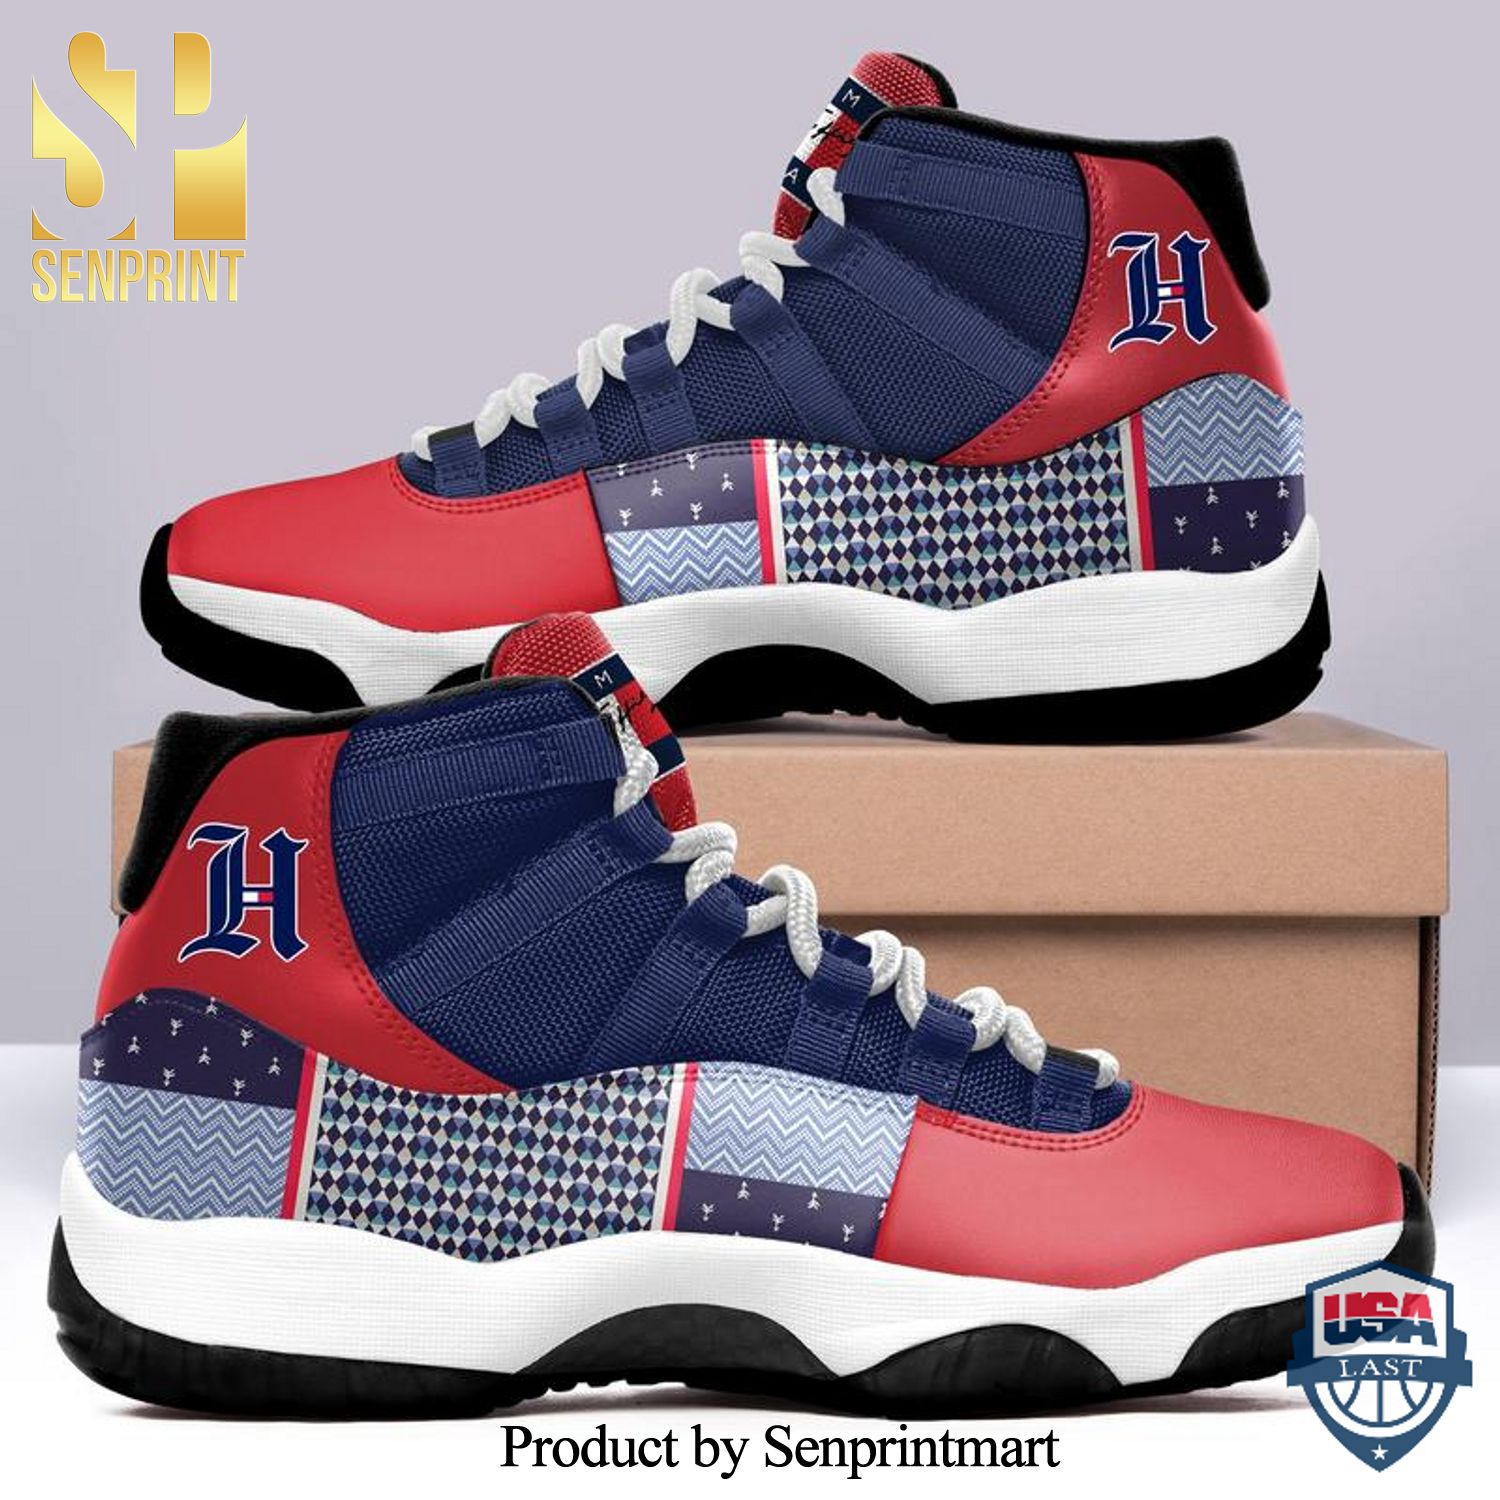 Tommy hilfiger pattern sneaker Hot Outfit All Over Print Air Jordan 11